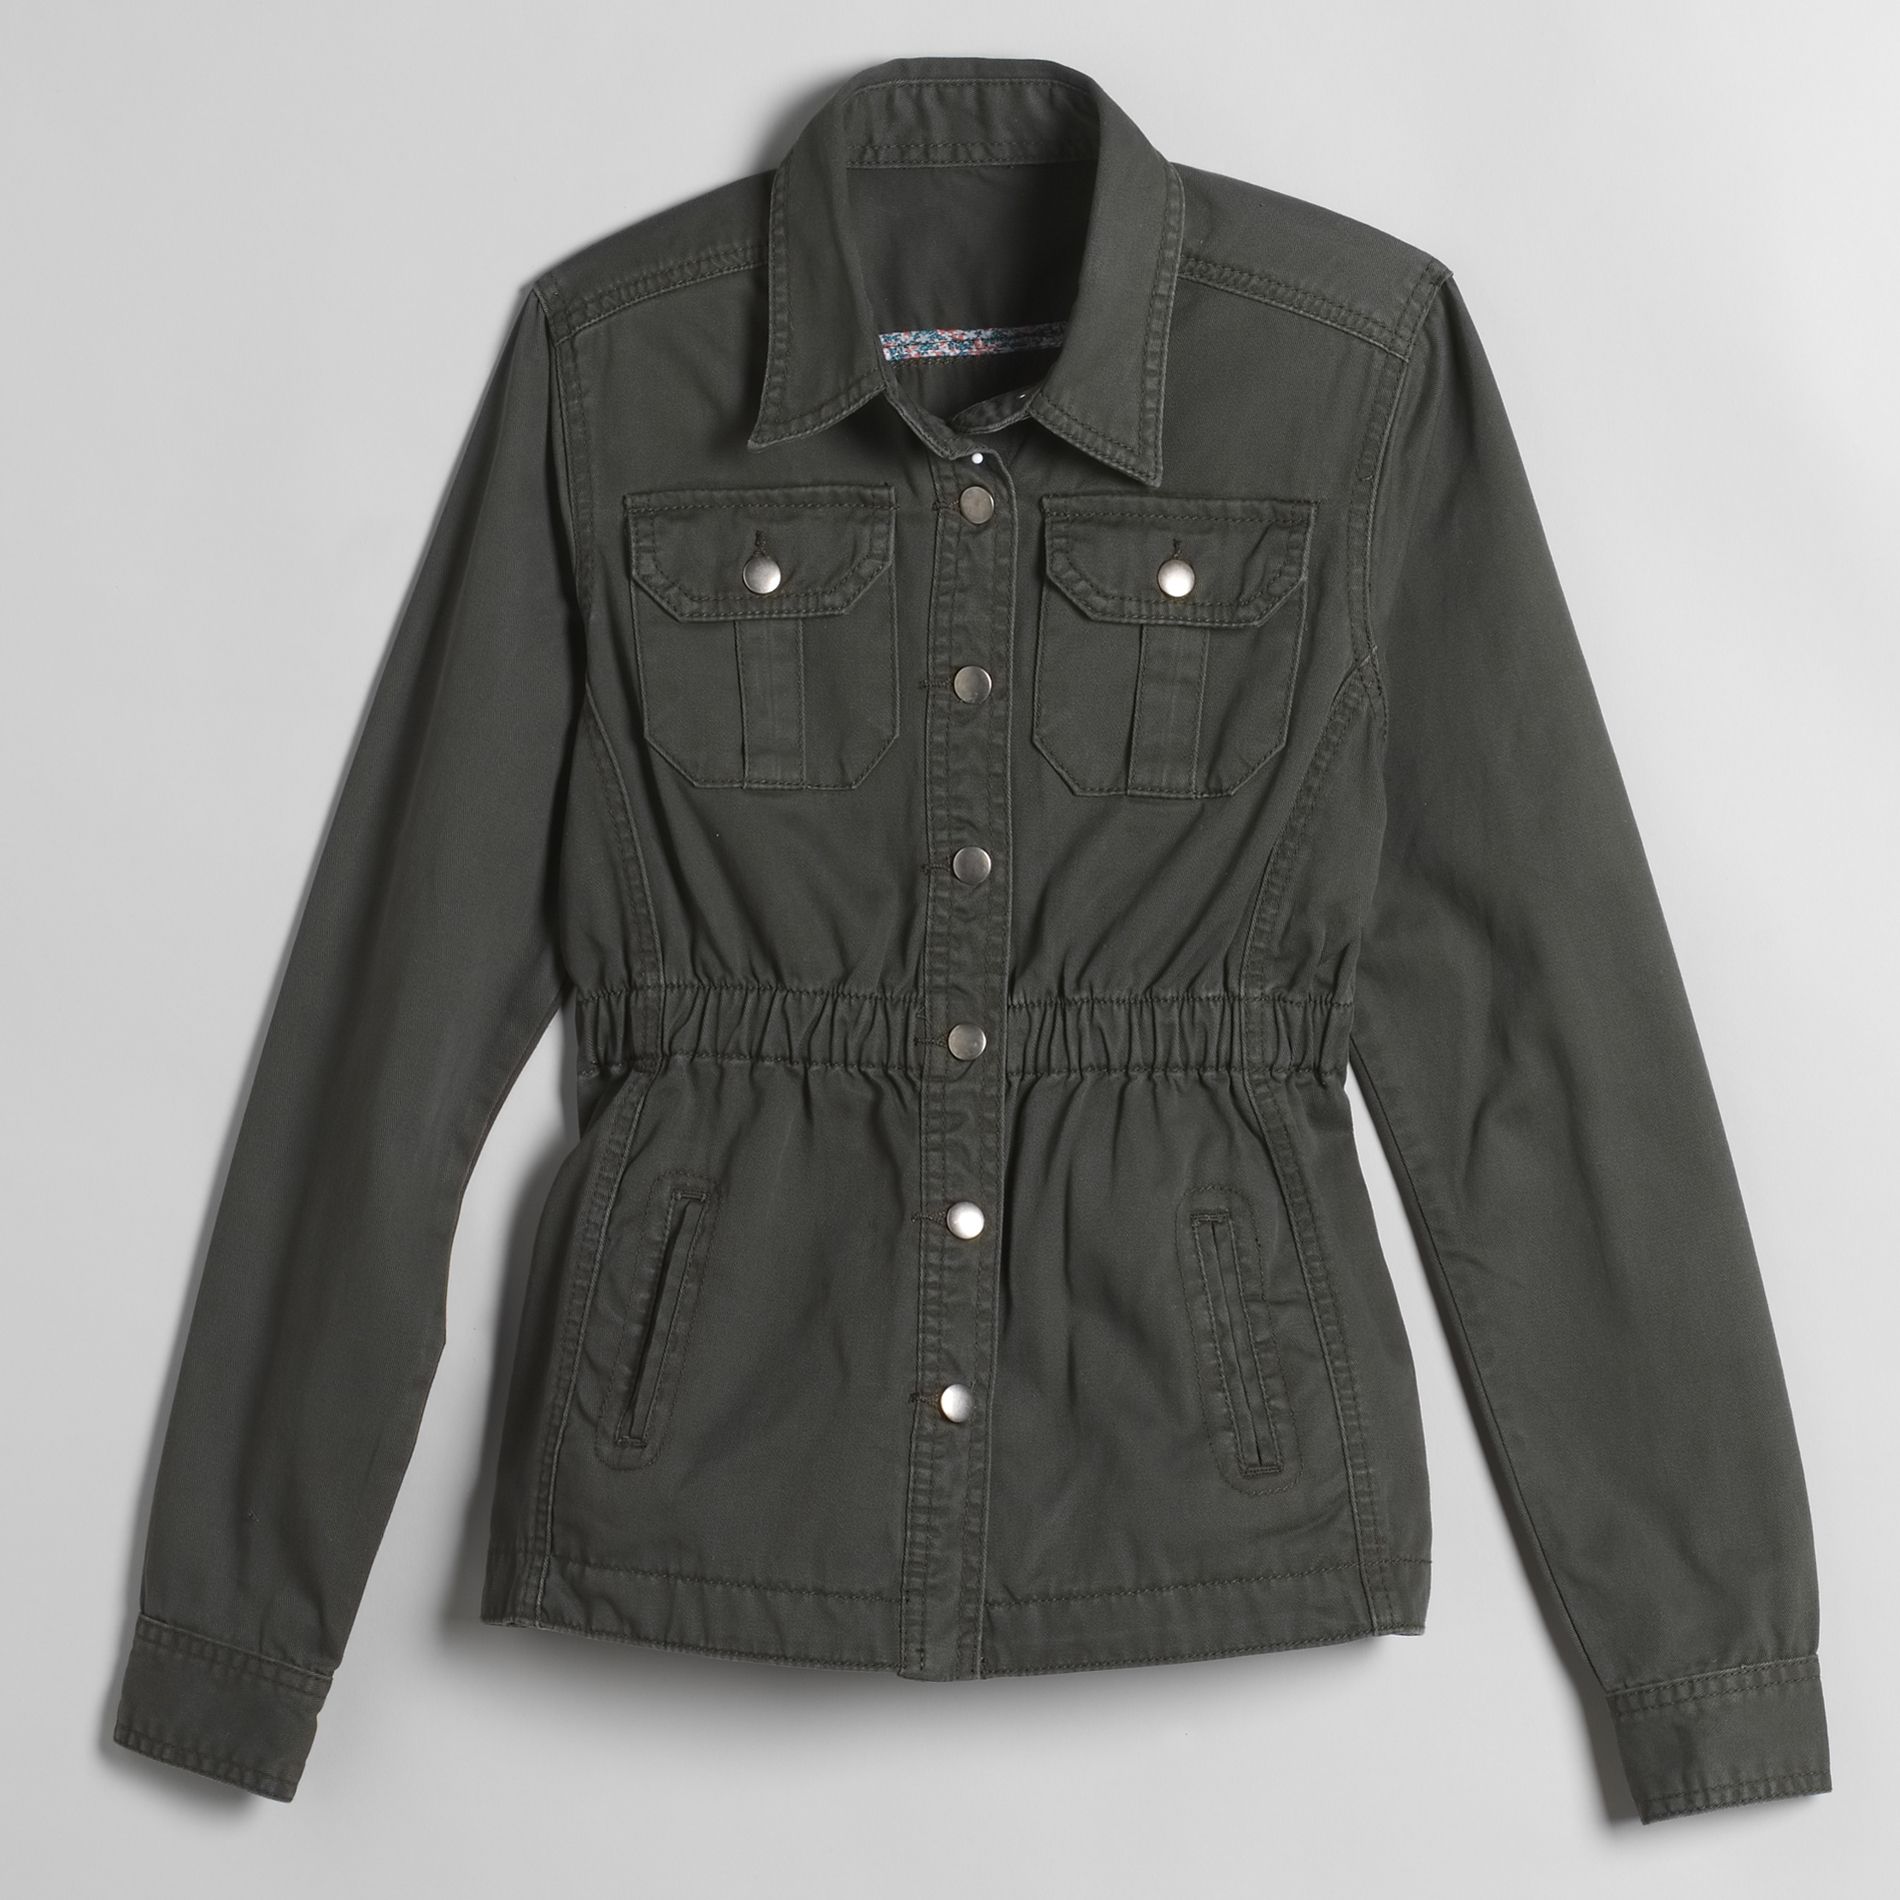 Route 66 Girls' Military Jacket